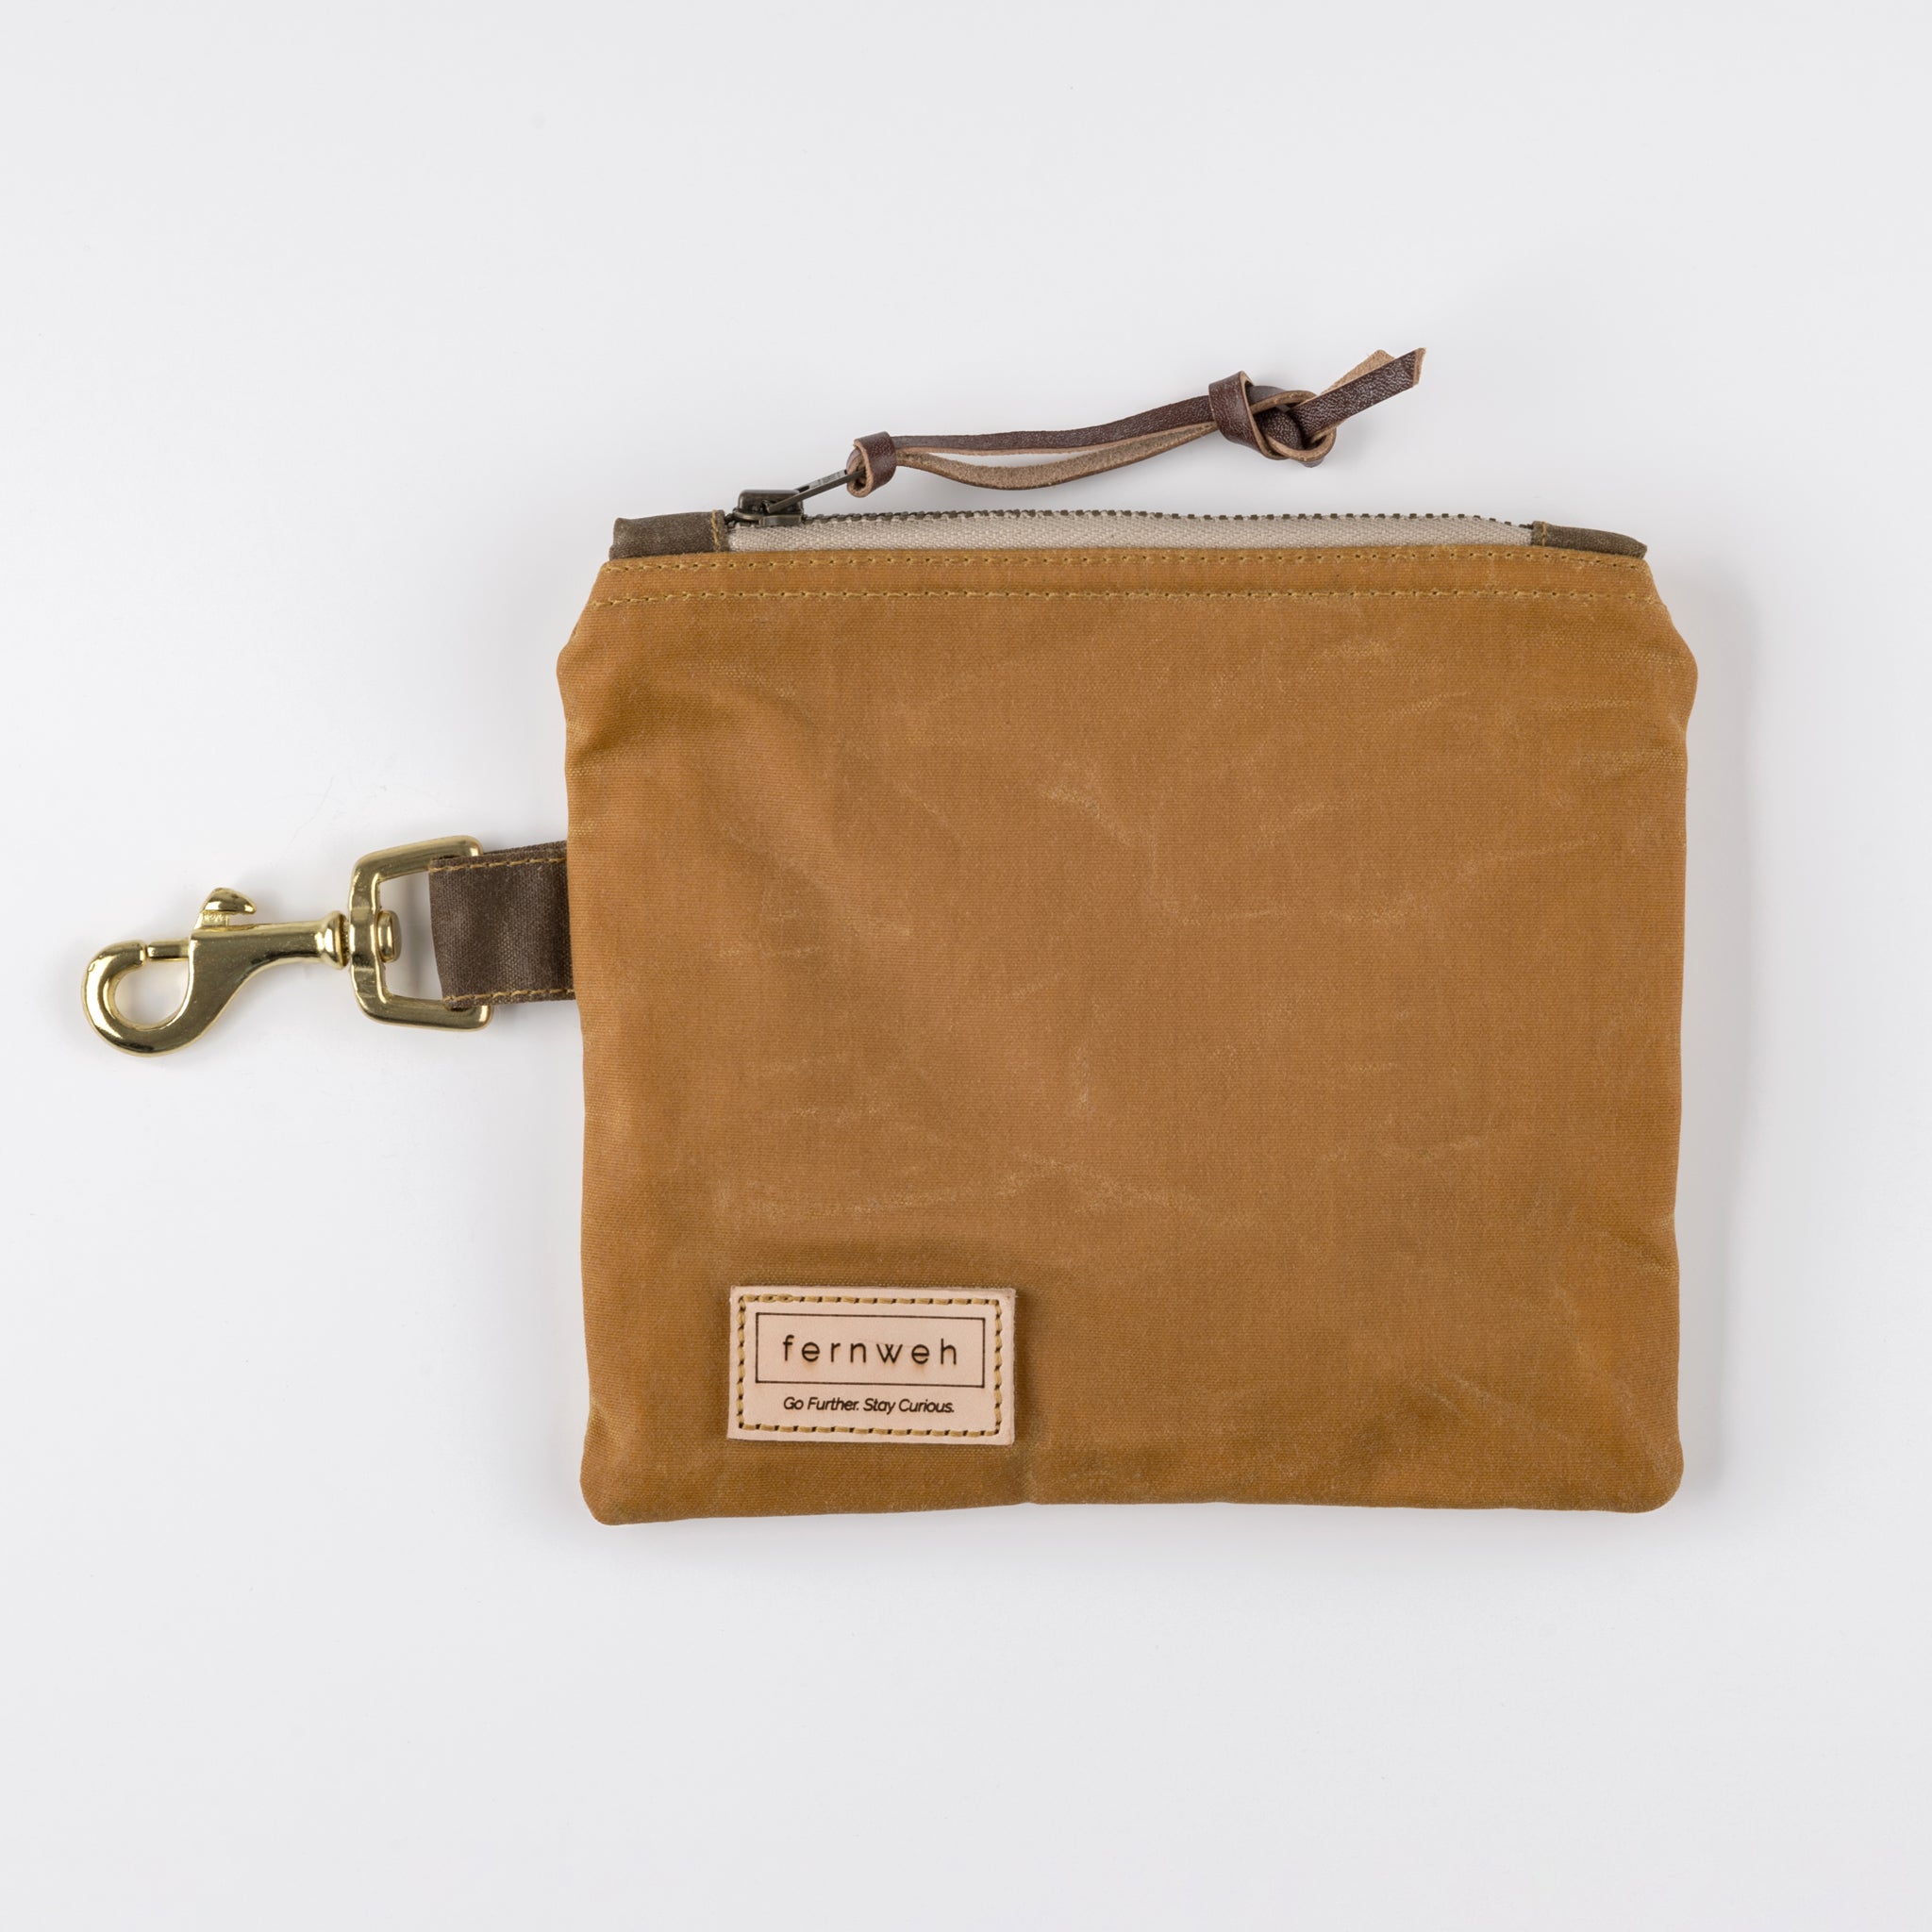 Image shows waxed cotton pouch handcrafted in Scotland.